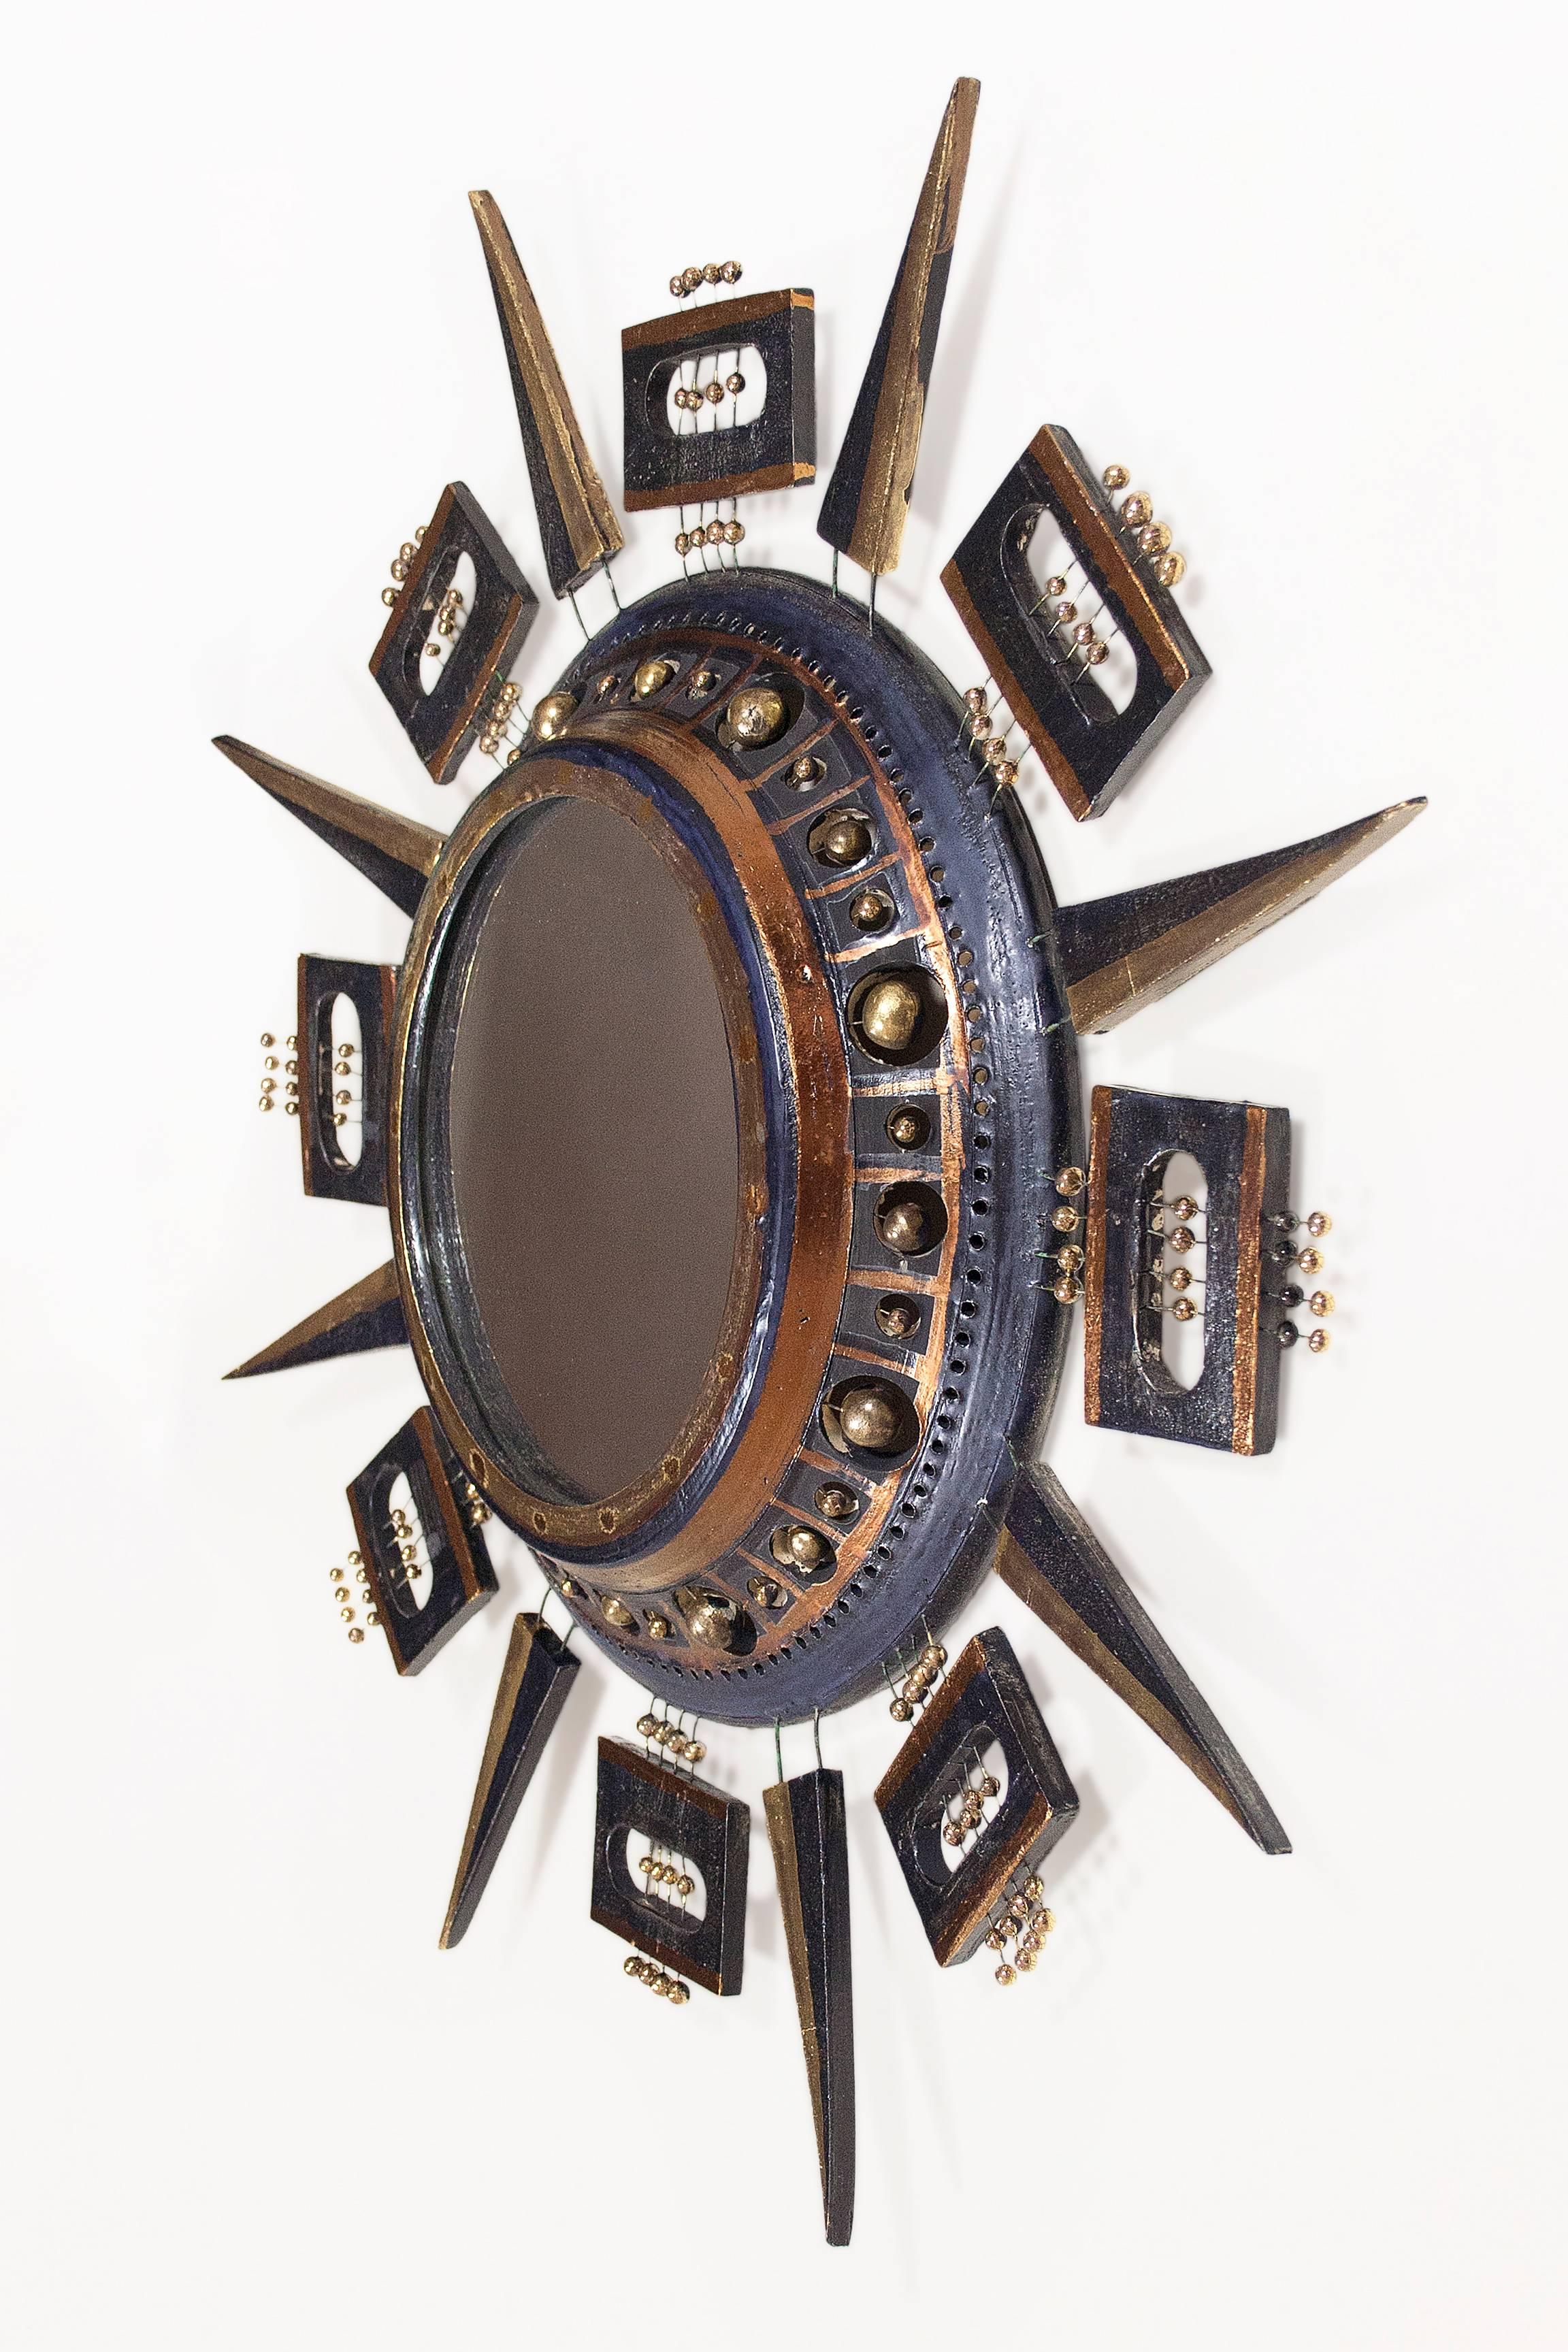 Ceramic sunburst mirror by Georges Pelletier 
Black and gold glazed ceramic 
Signed
circa 1970, France 
Very good vintage condition.